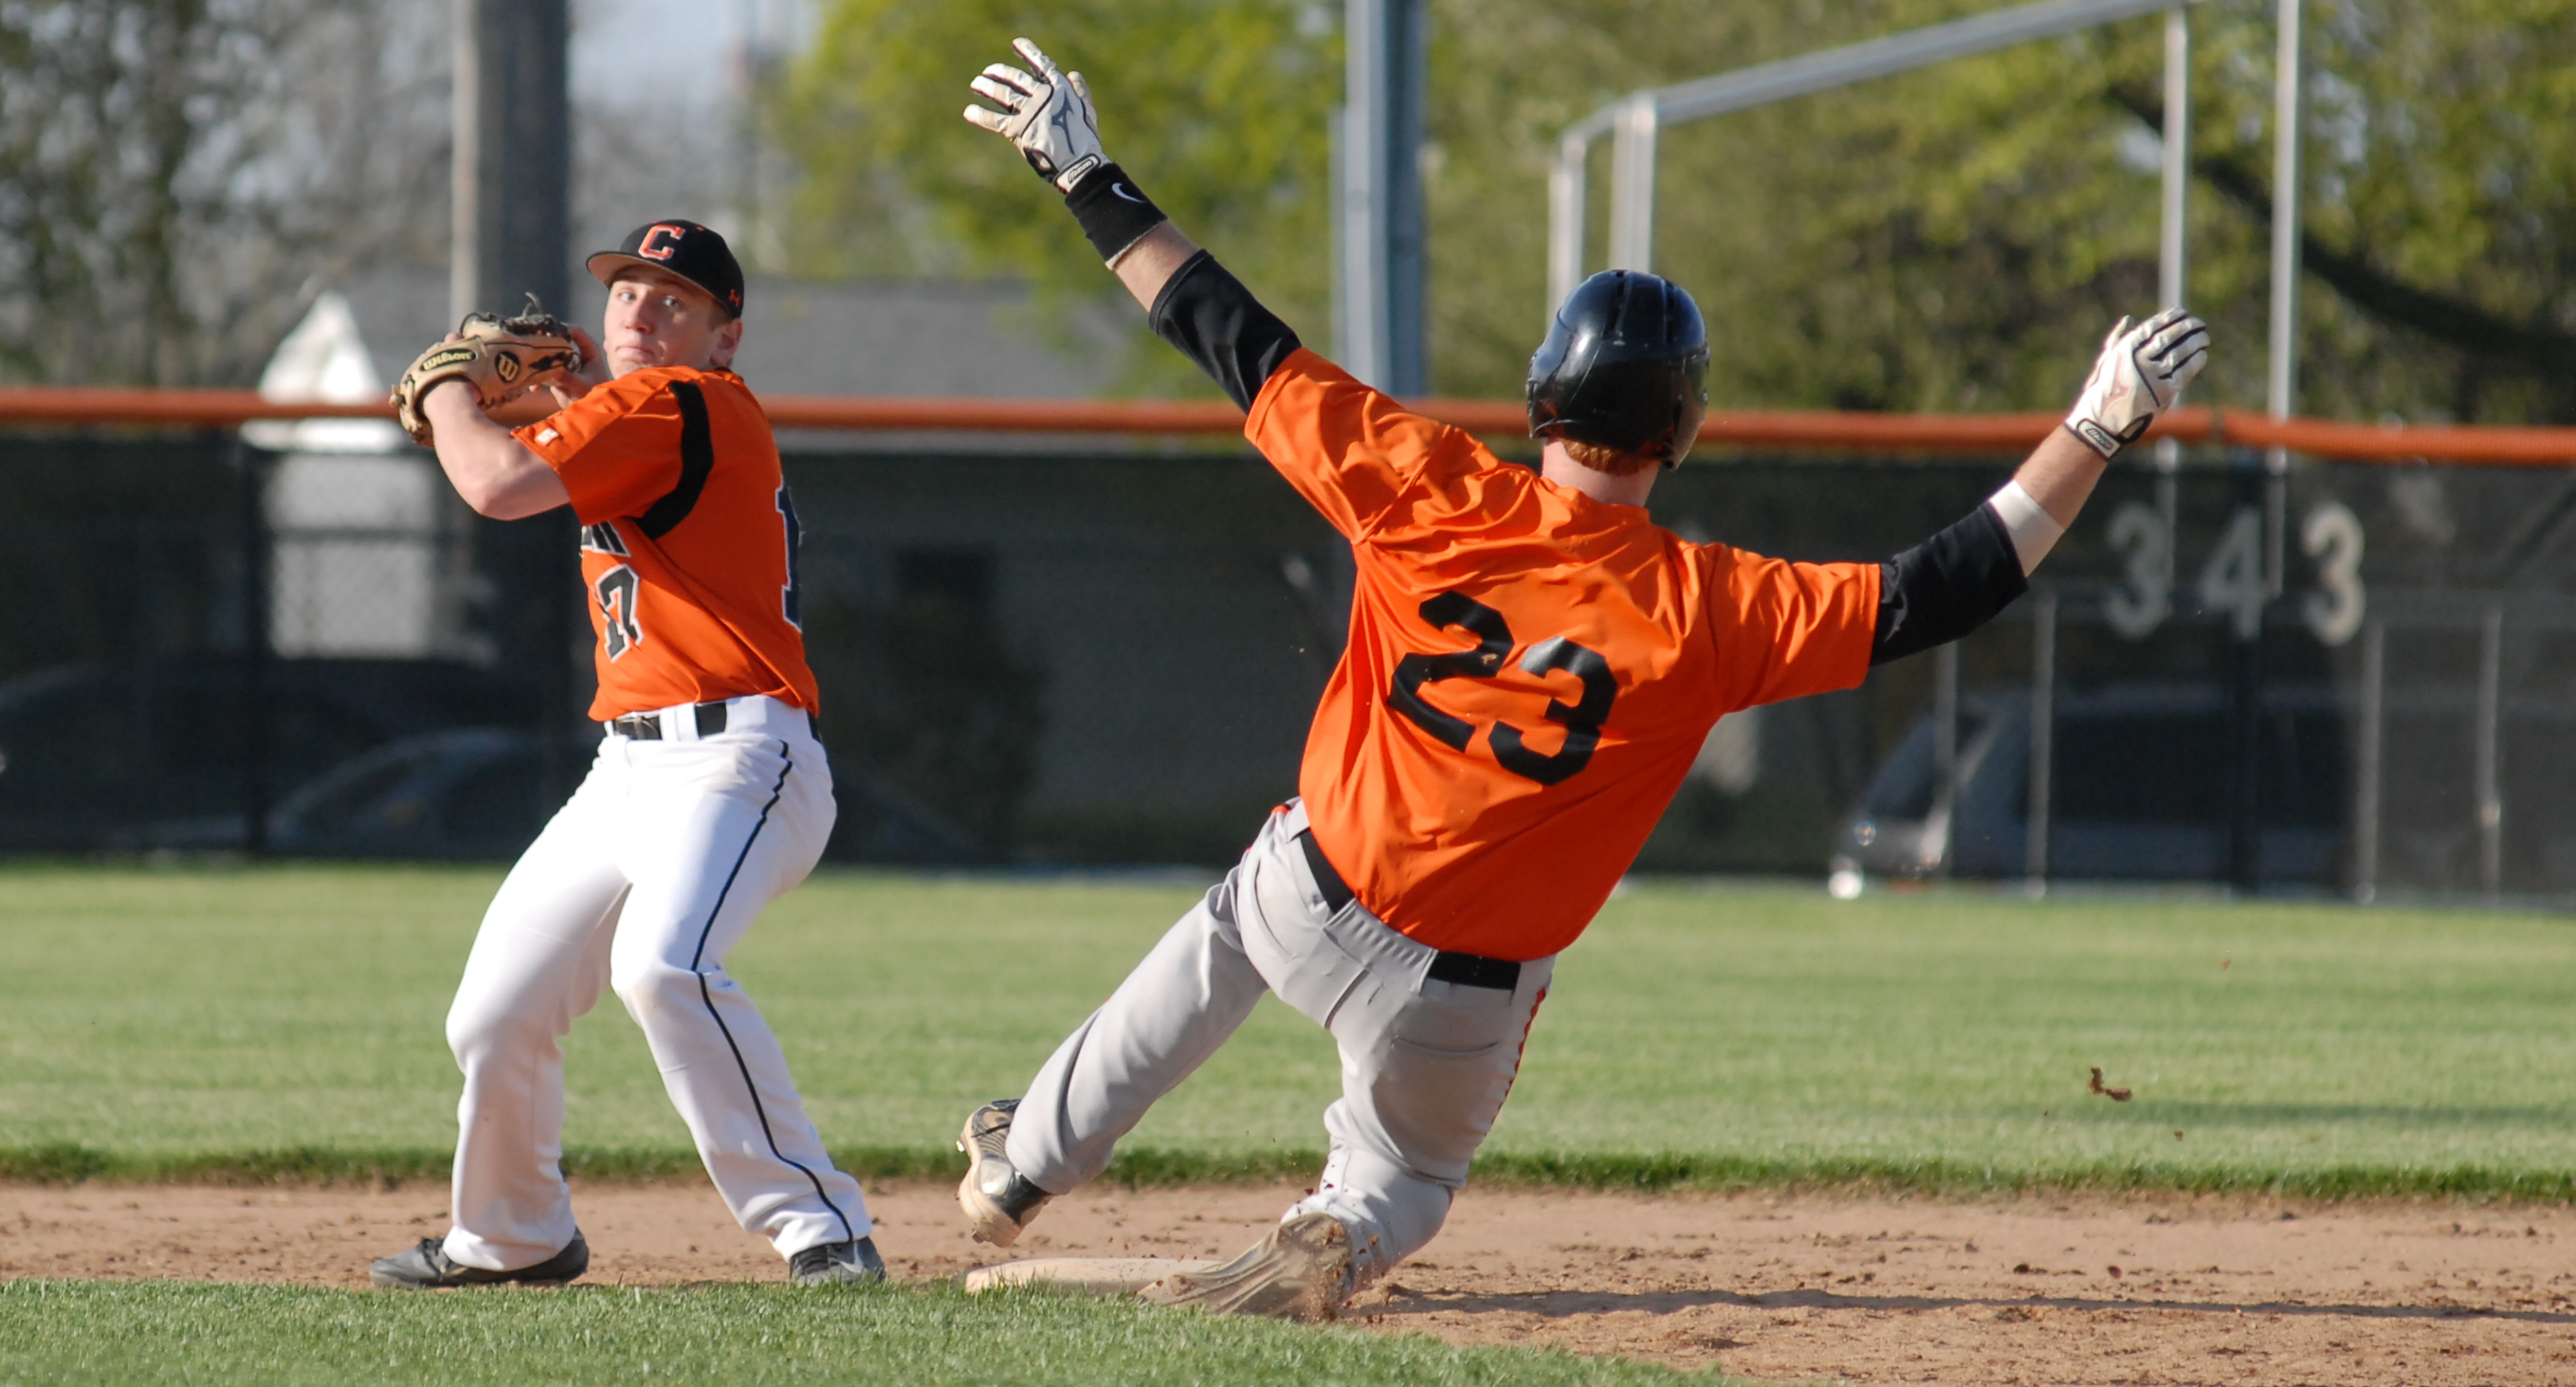 Coldwater's Drew Otten turning a double play